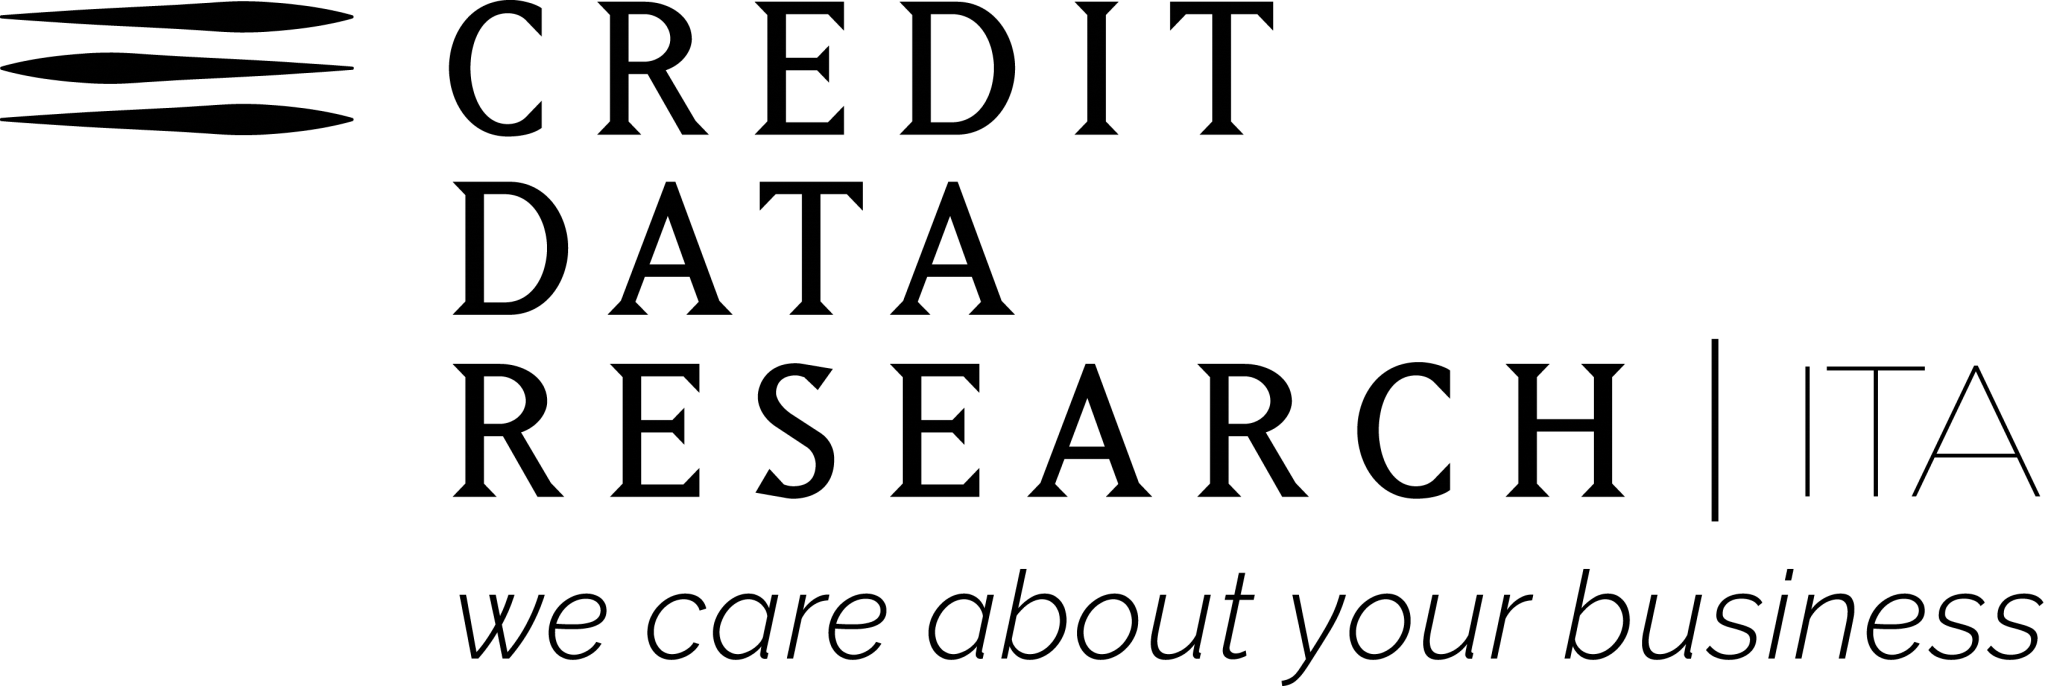 Partner CDR - Credit Data Research